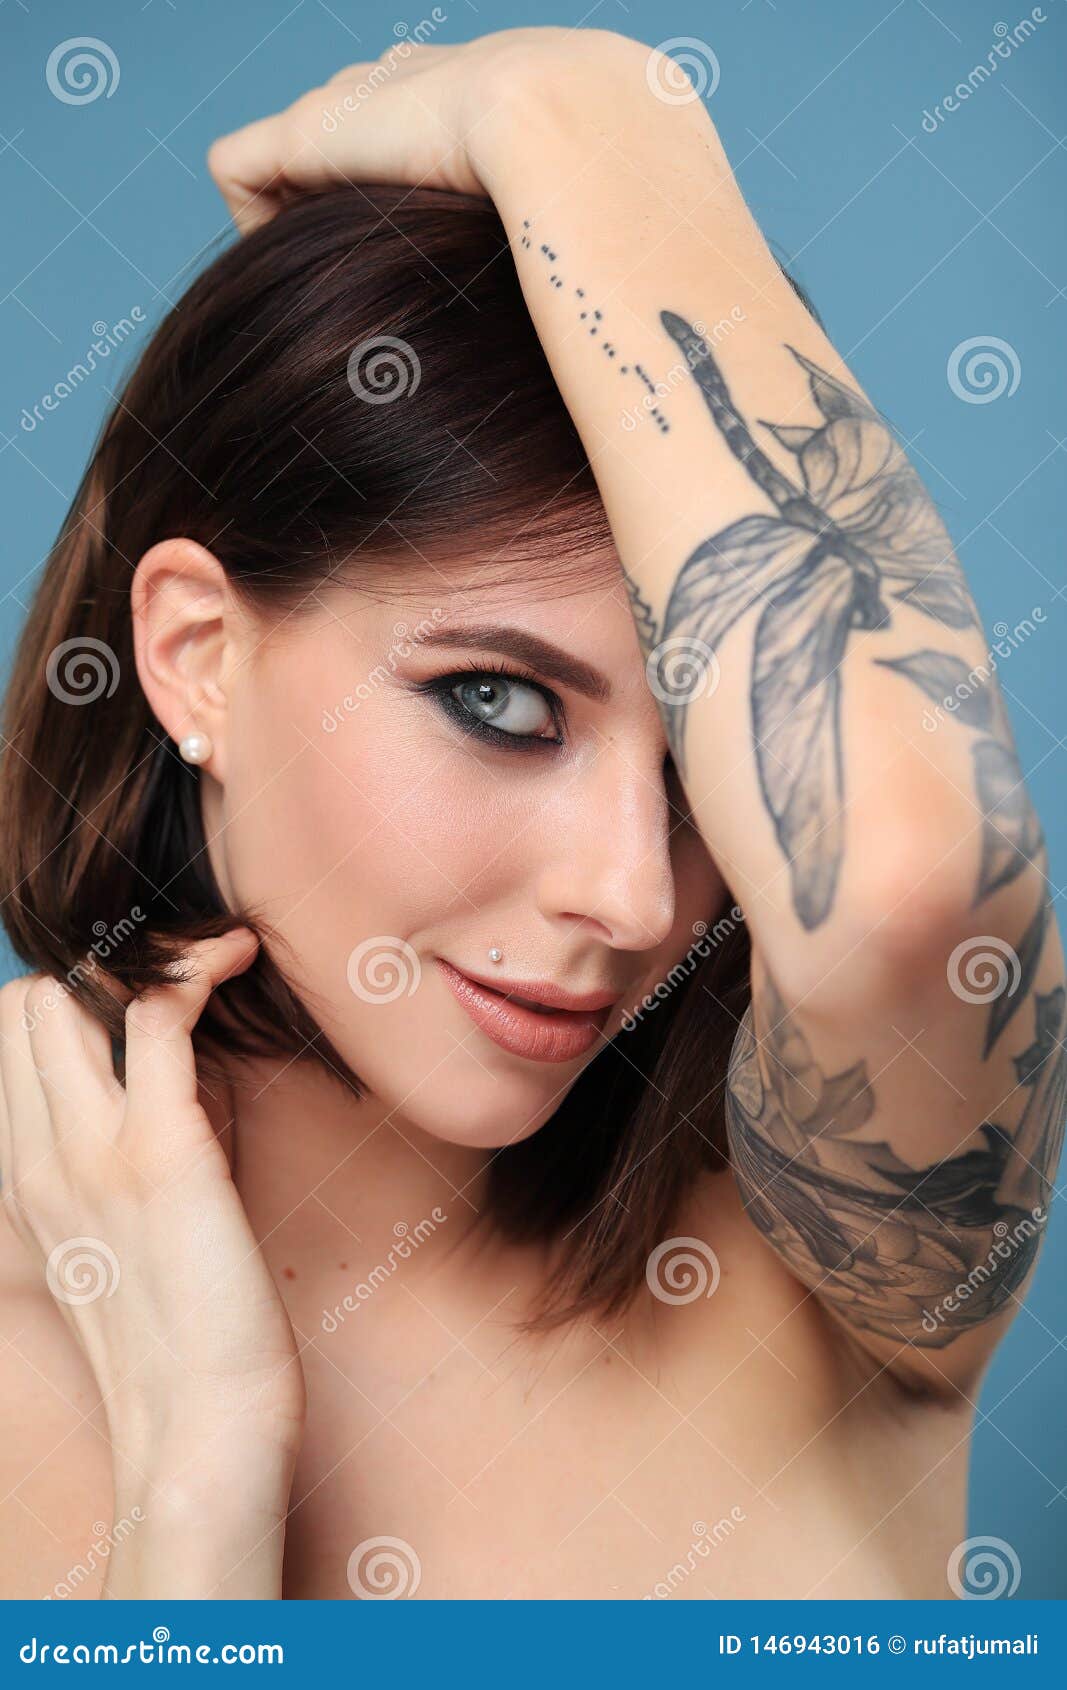 Beautiful Tattooed Girl Images Browse 147264 Stock Photos  Vectors Free  Download with Trial  Shutterstock